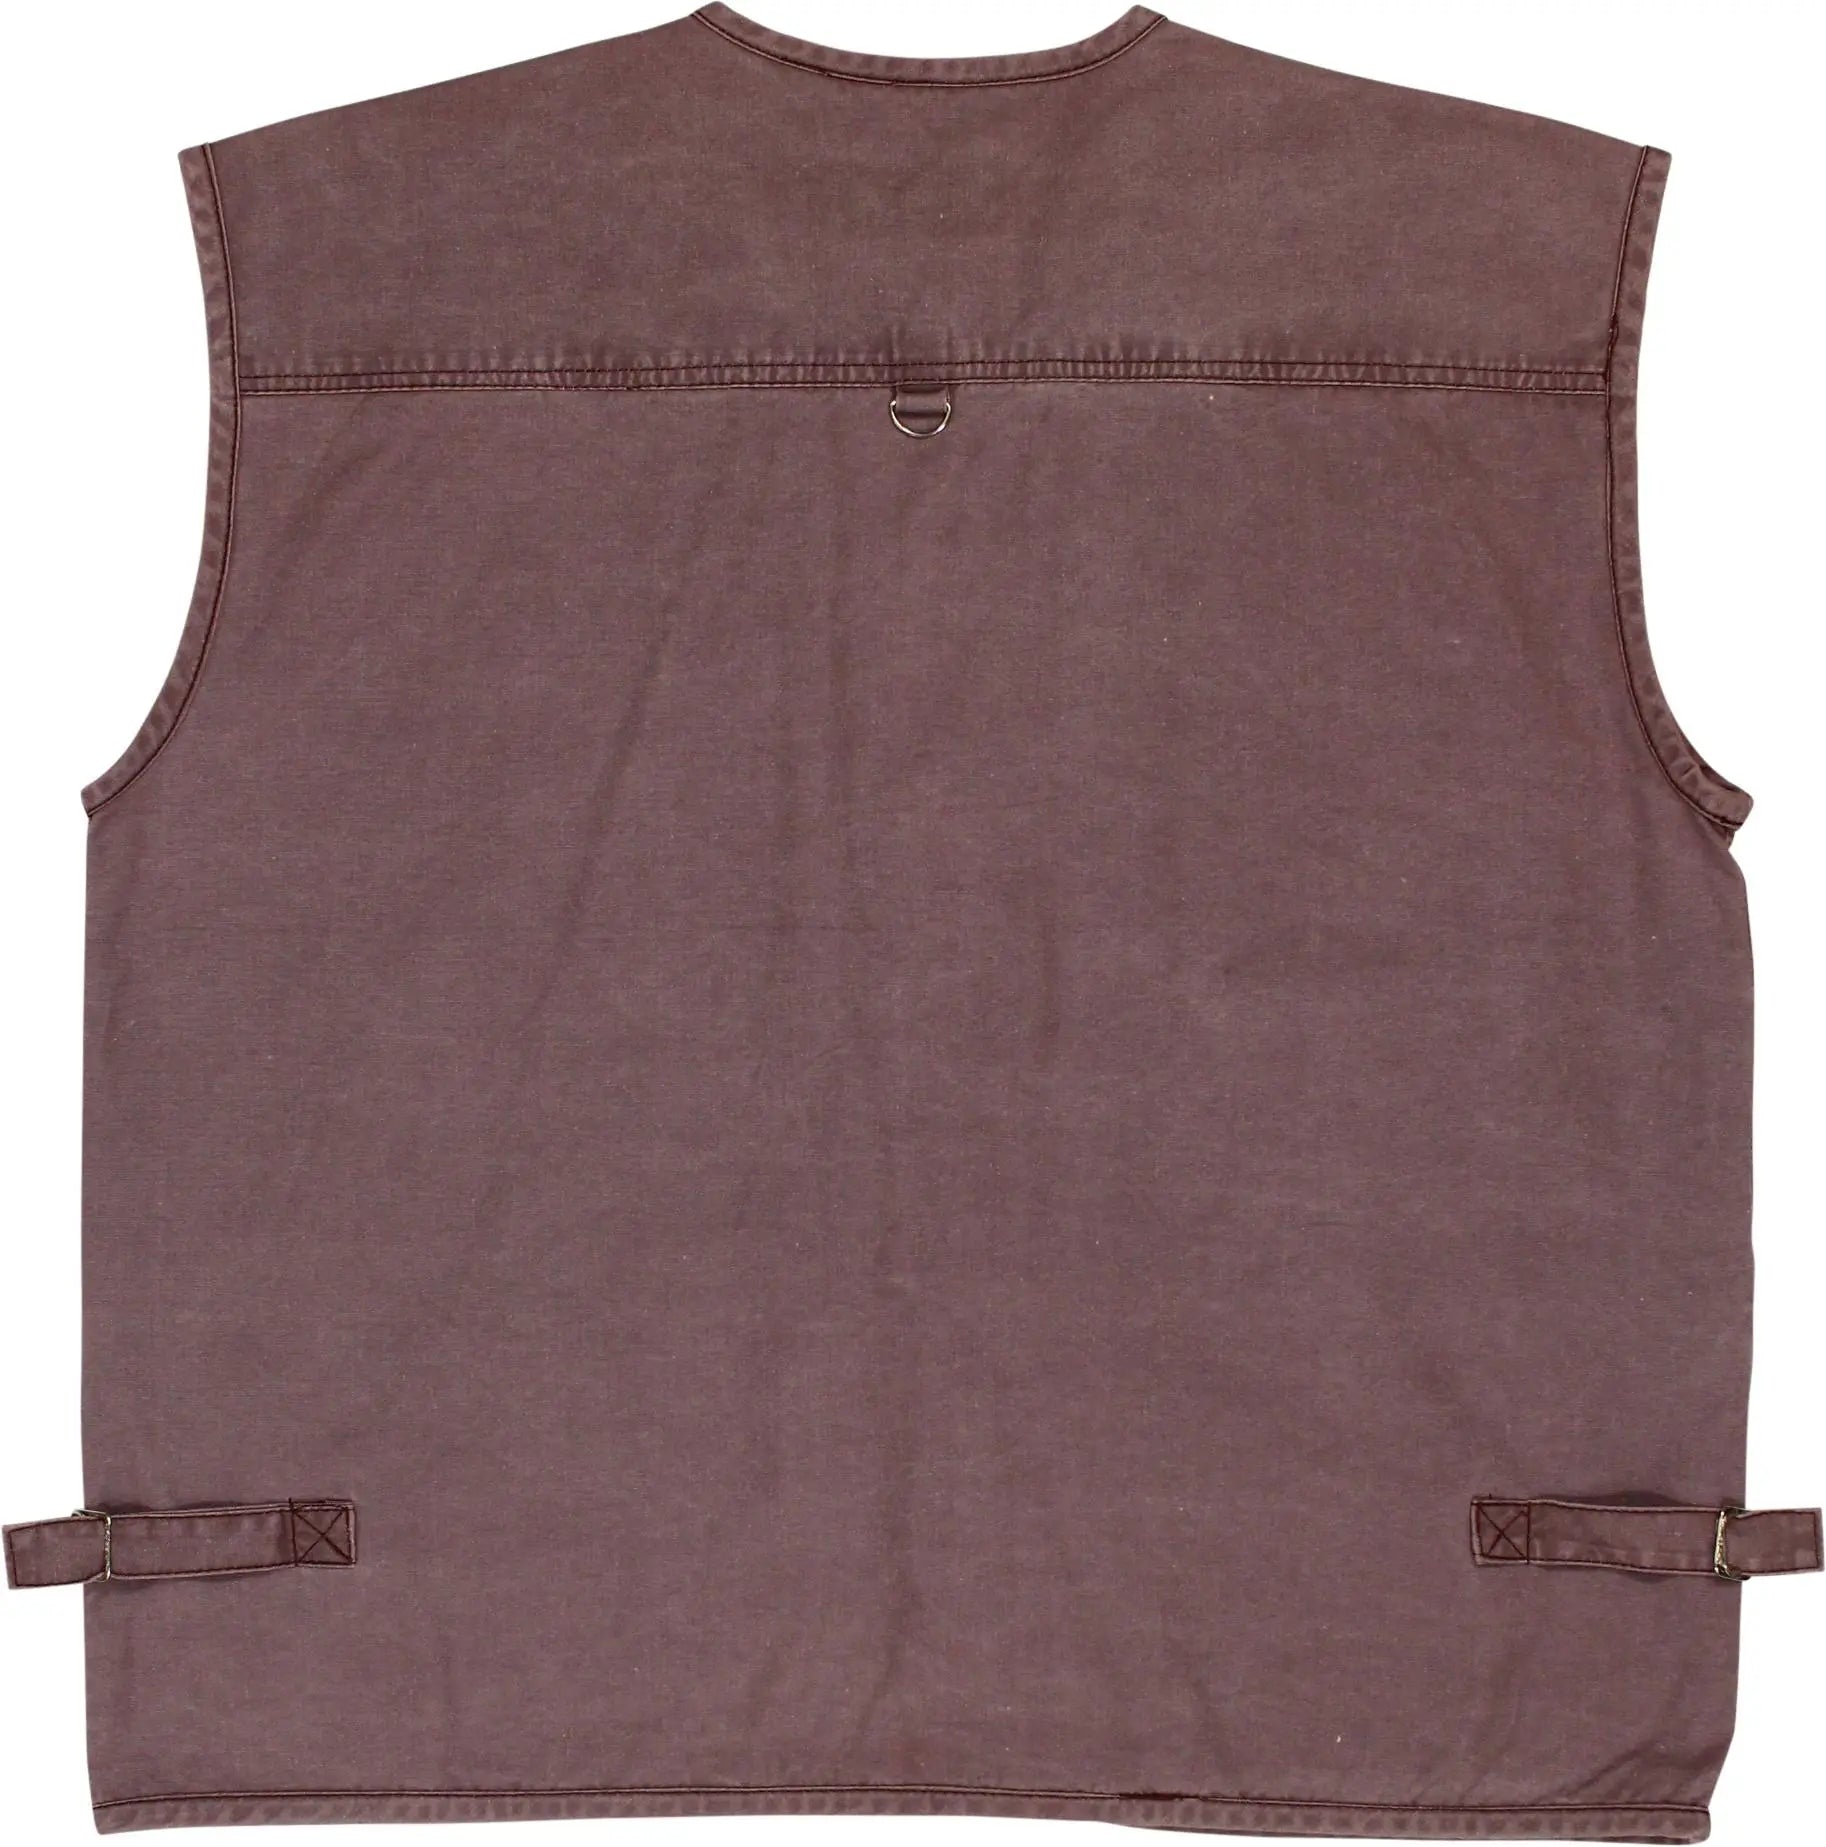 Latest Star - Plum Colored Vest- ThriftTale.com - Vintage and second handclothing